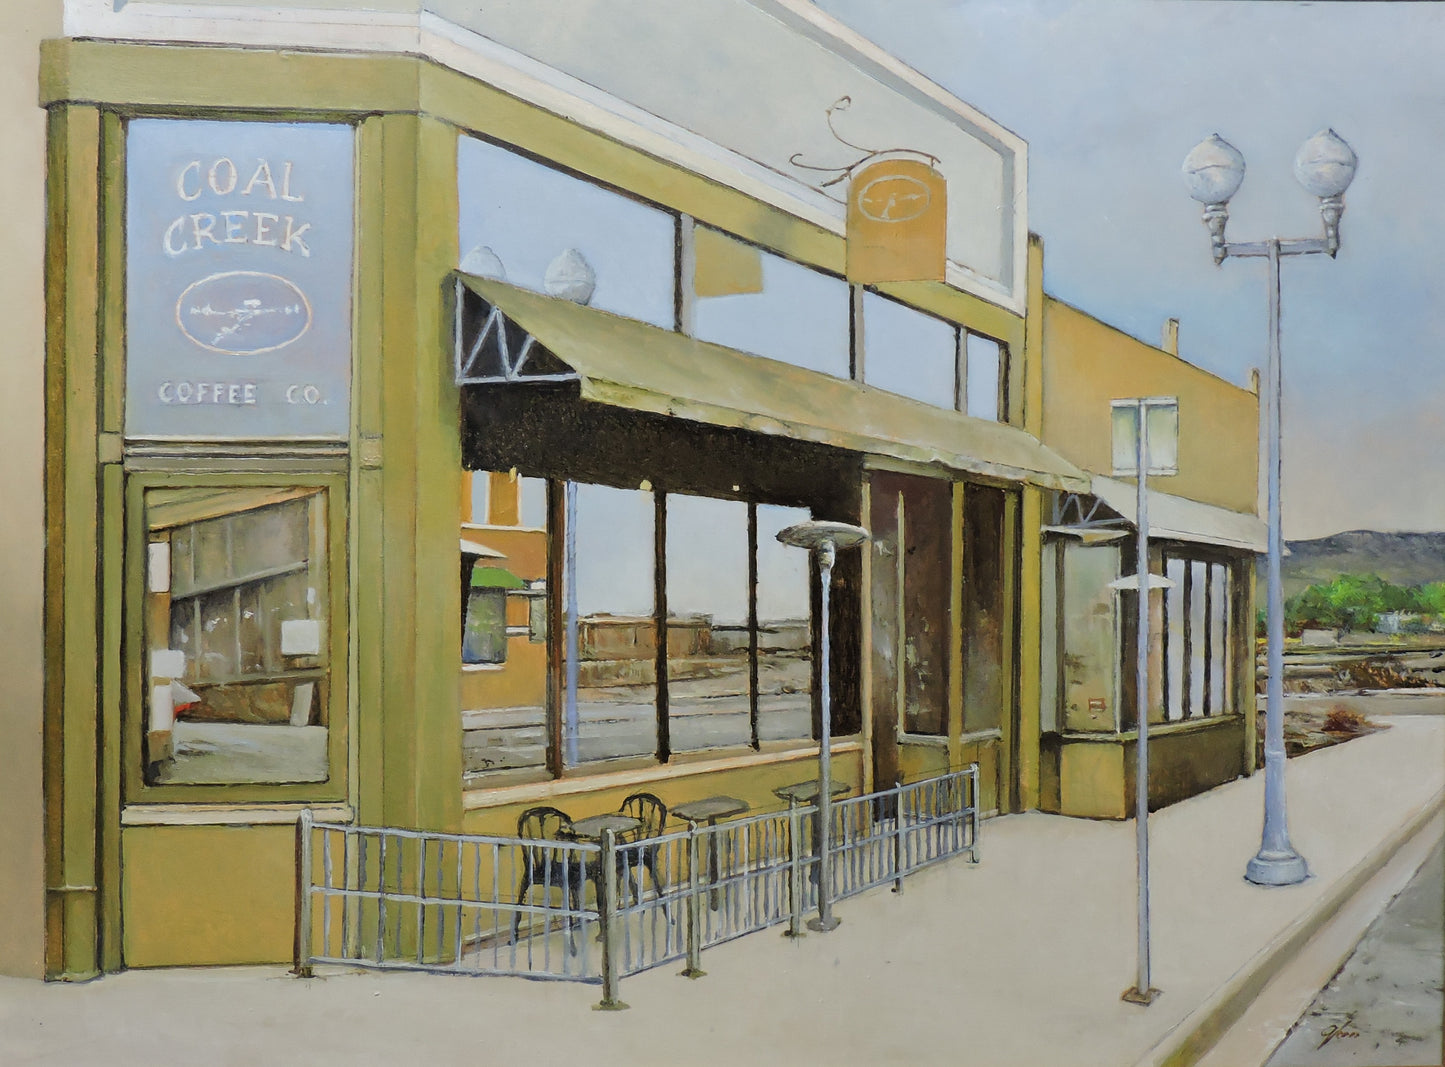 Coal Creek Reflections Artist: Jerry Glass  Original Oil Painting  Framed, dark brown / black wood color  Scene of Coal Creek Coffee Shop  Grand Avenue  23" x 18" the unframed  painting